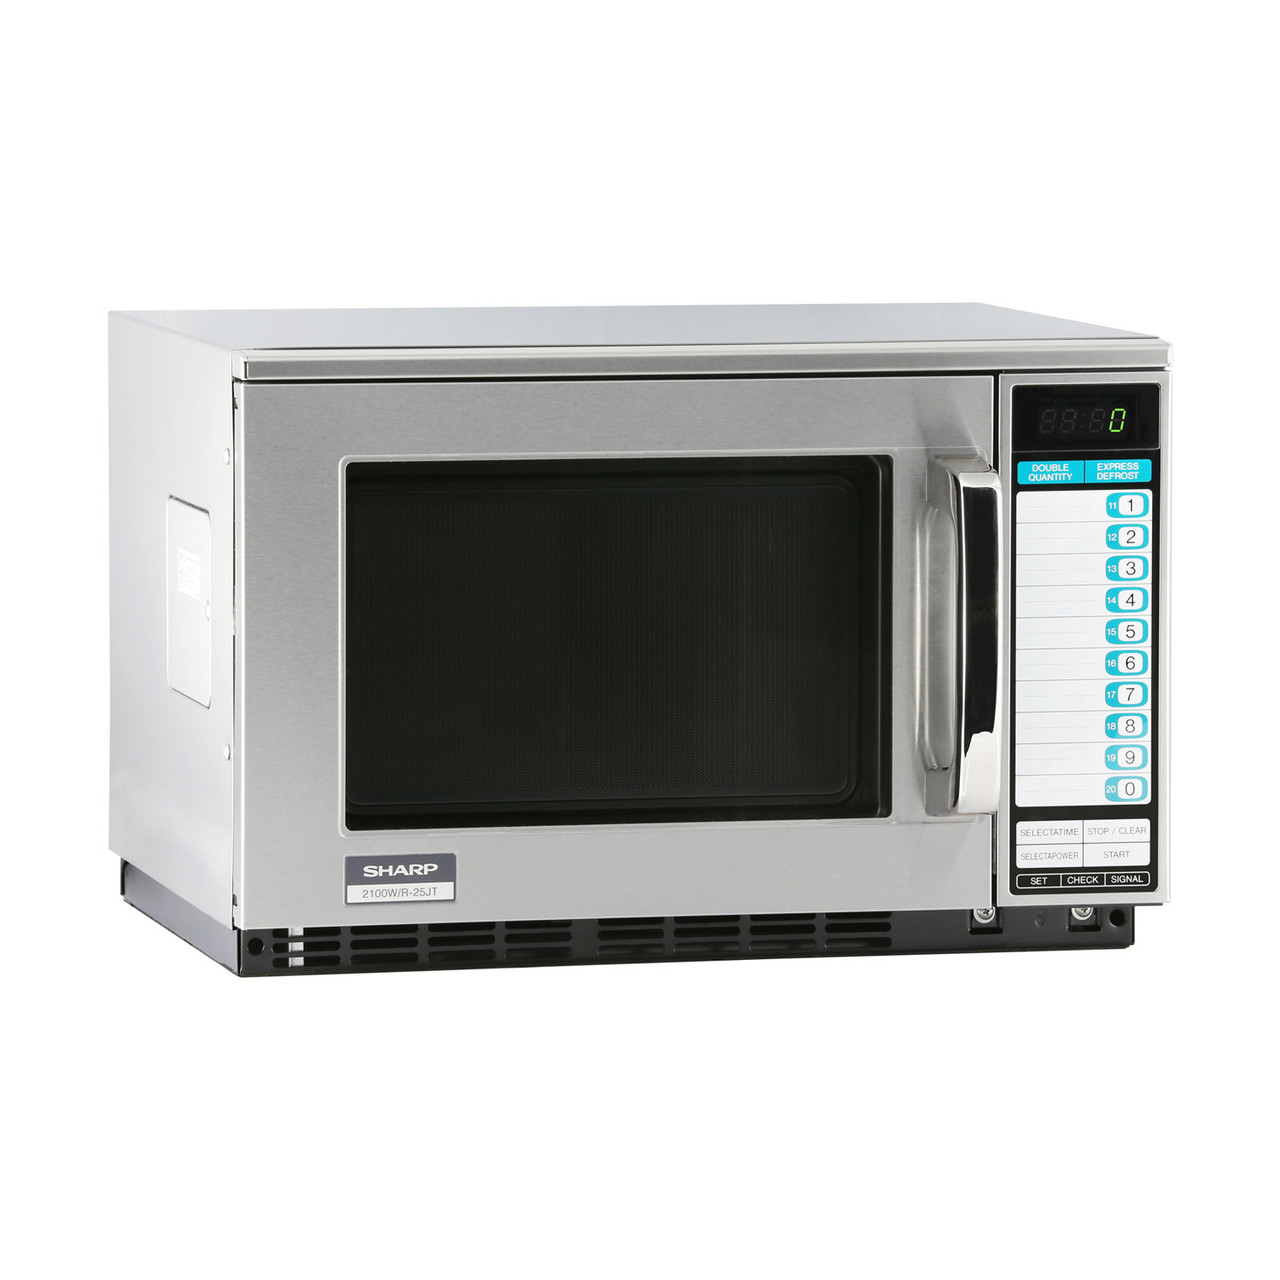 Sharp R25JTF Heavy-Duty Commercial Microwave Oven with 2100 Watts - right angle view